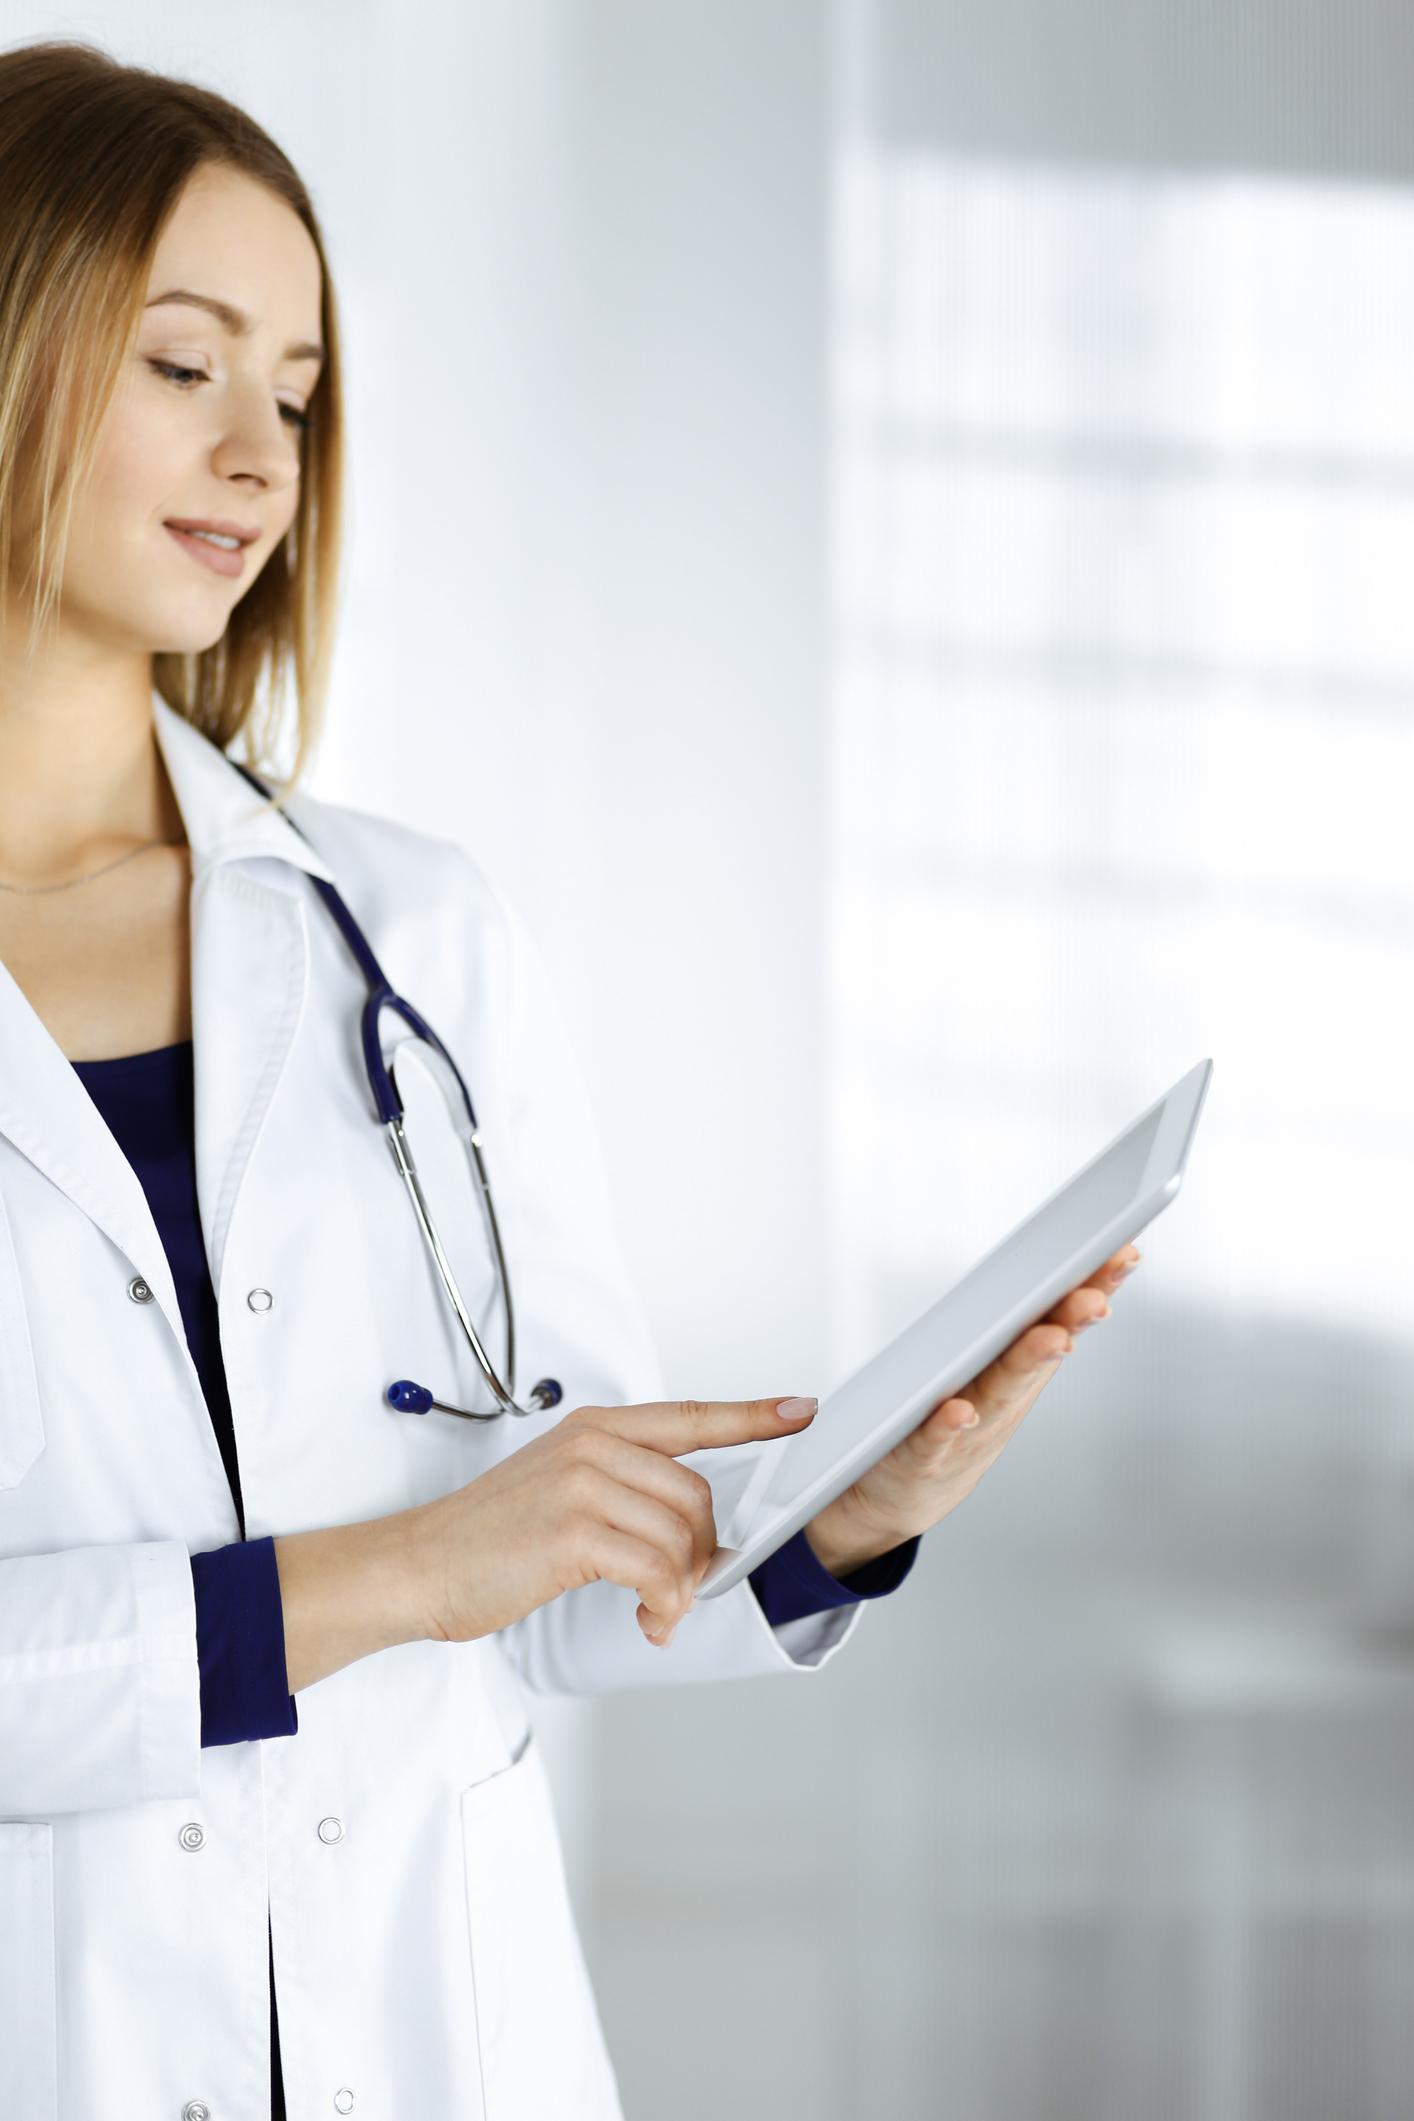 Young woman-doctor is holding a tablet computer in her hands, while standing in a clinic.